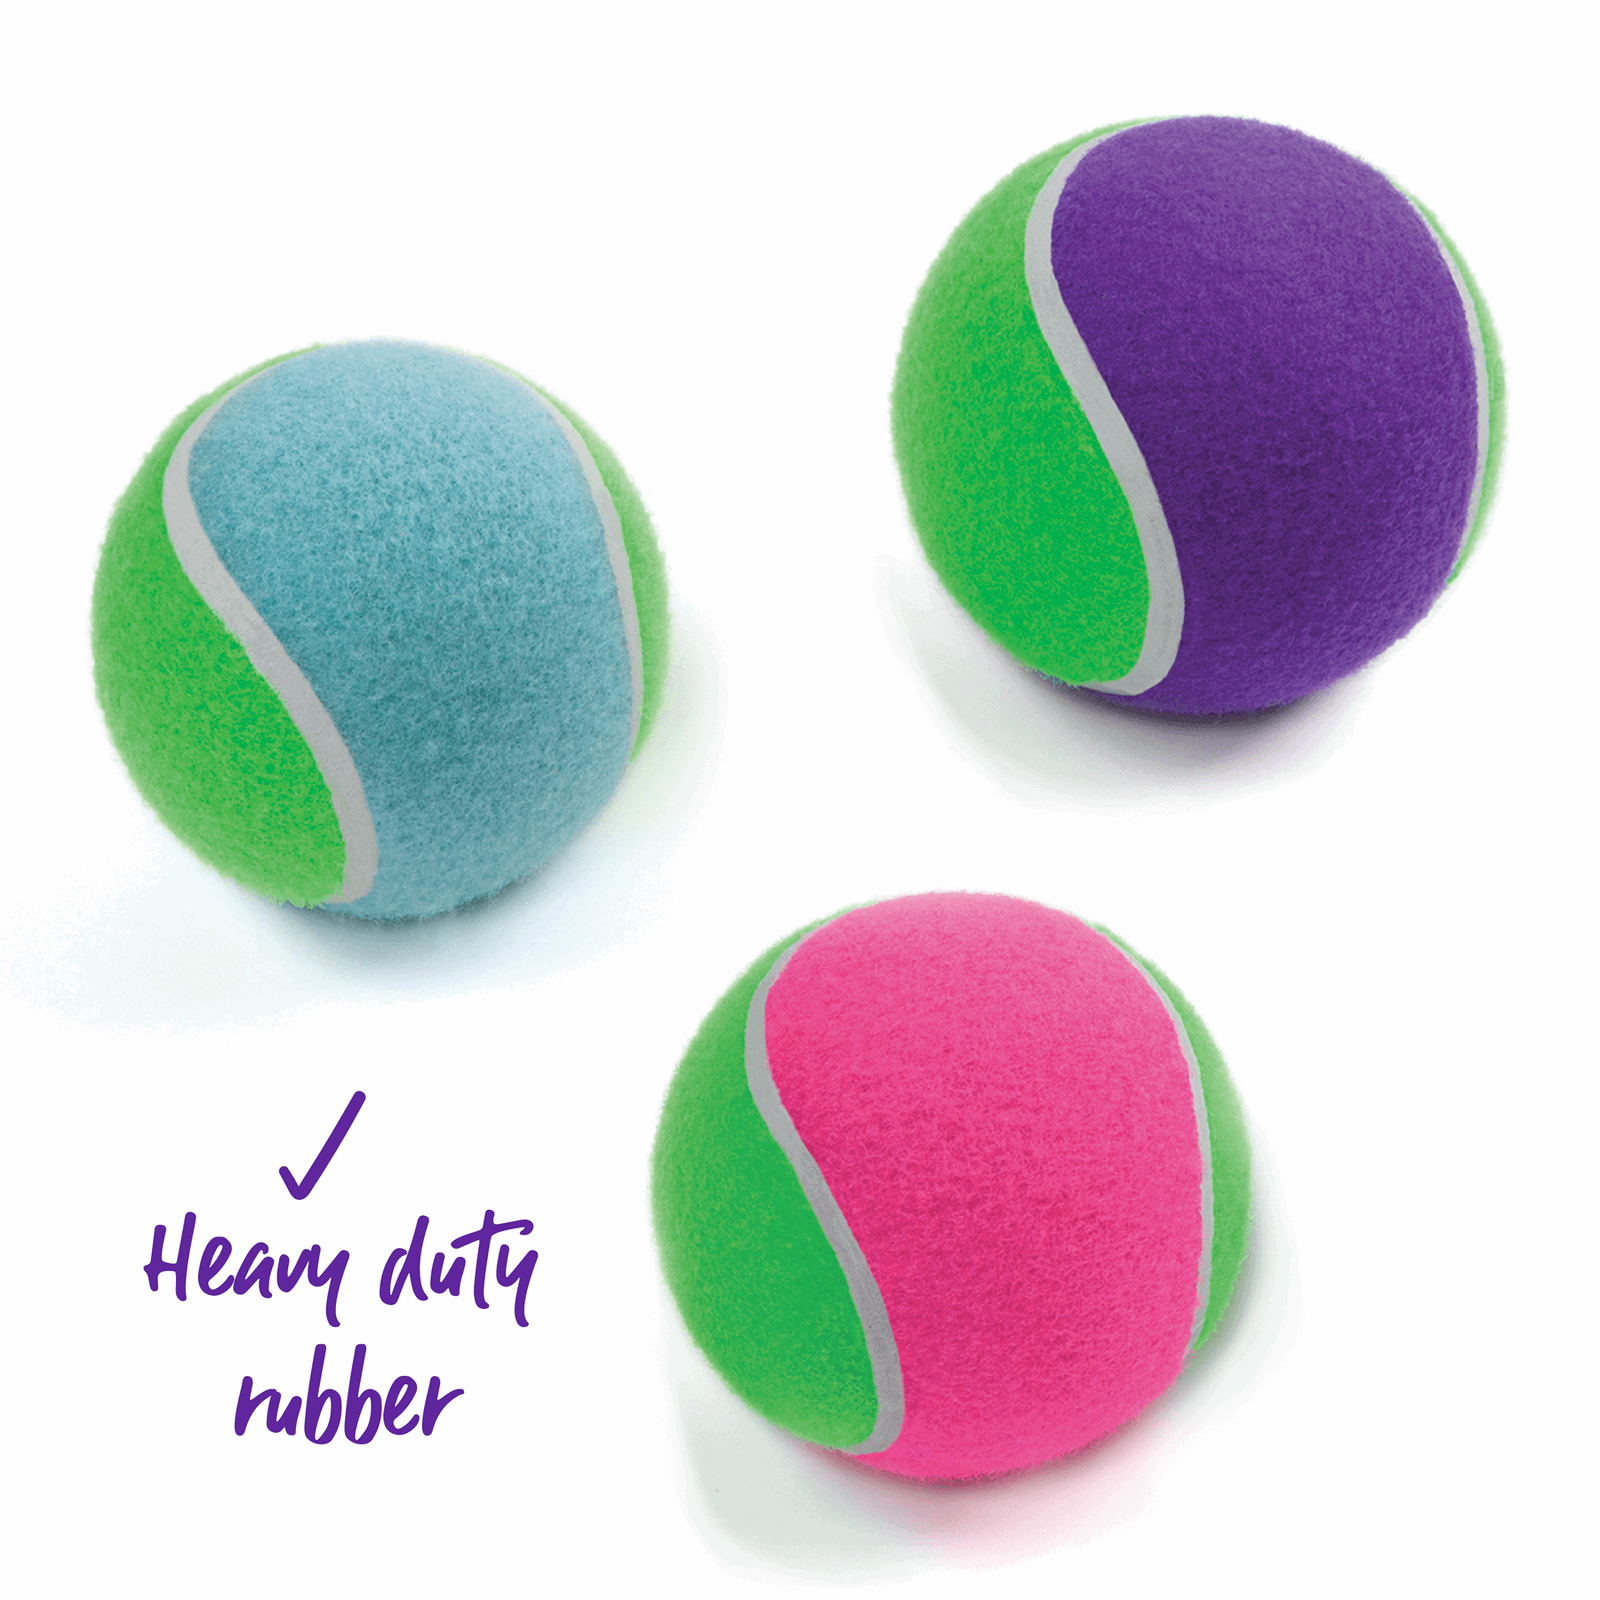 Kazoo Puncture Proof Tennis Ball from Kazoo Pet Co